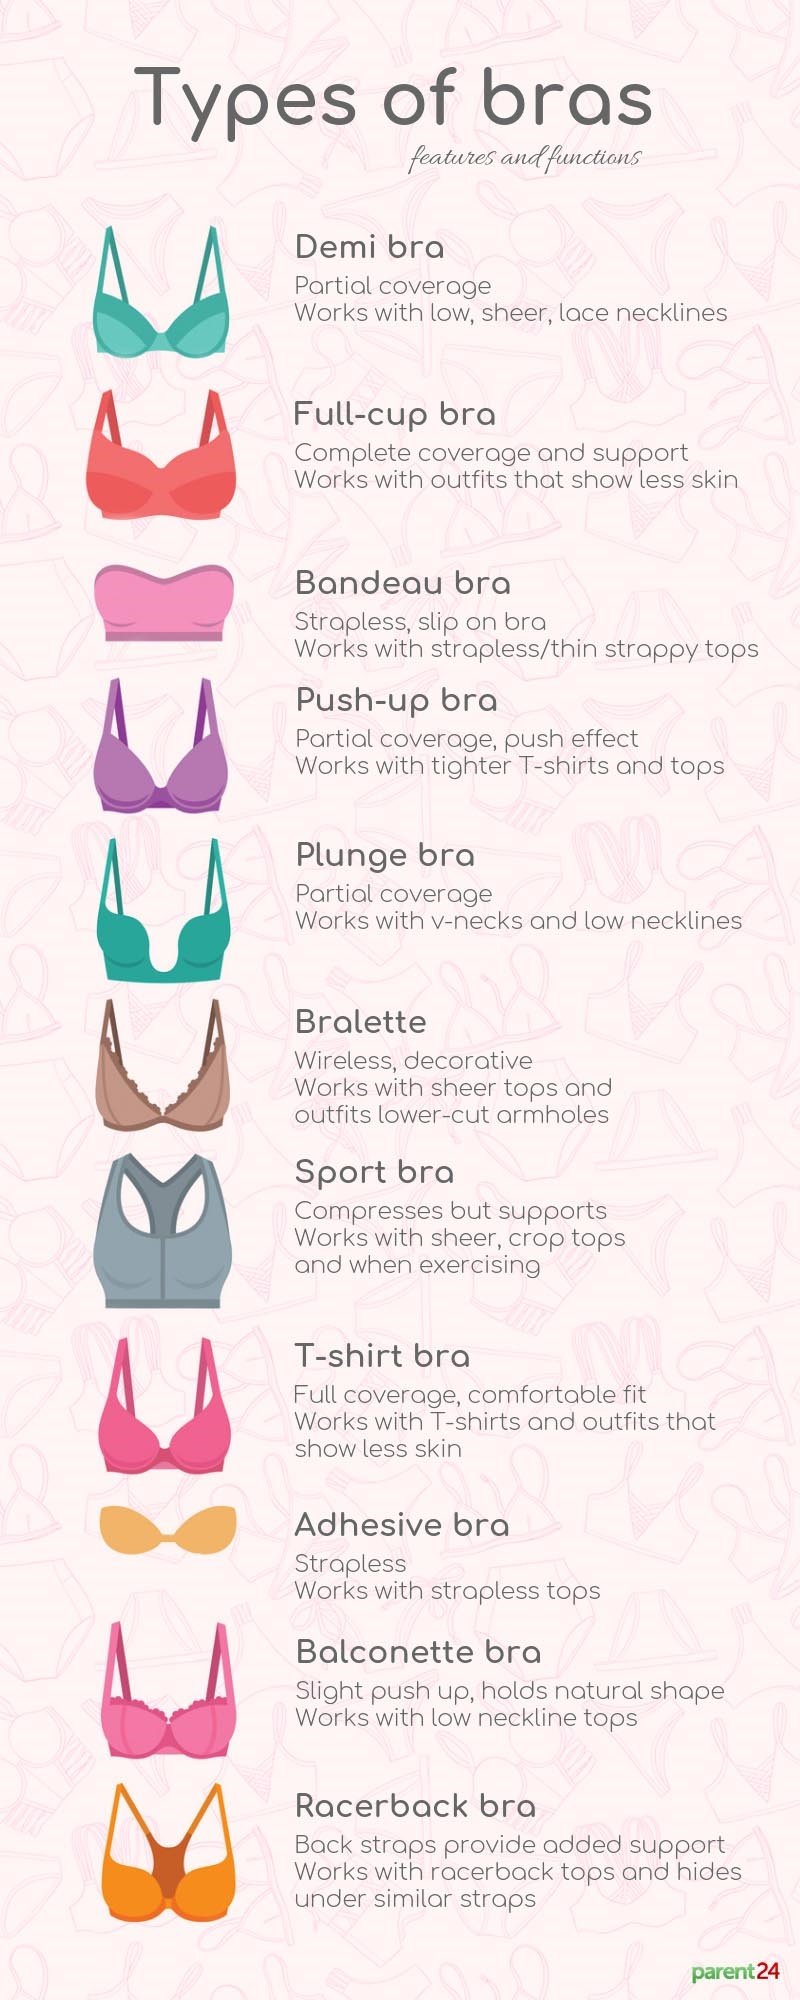 Types of bras and their features and functions inf